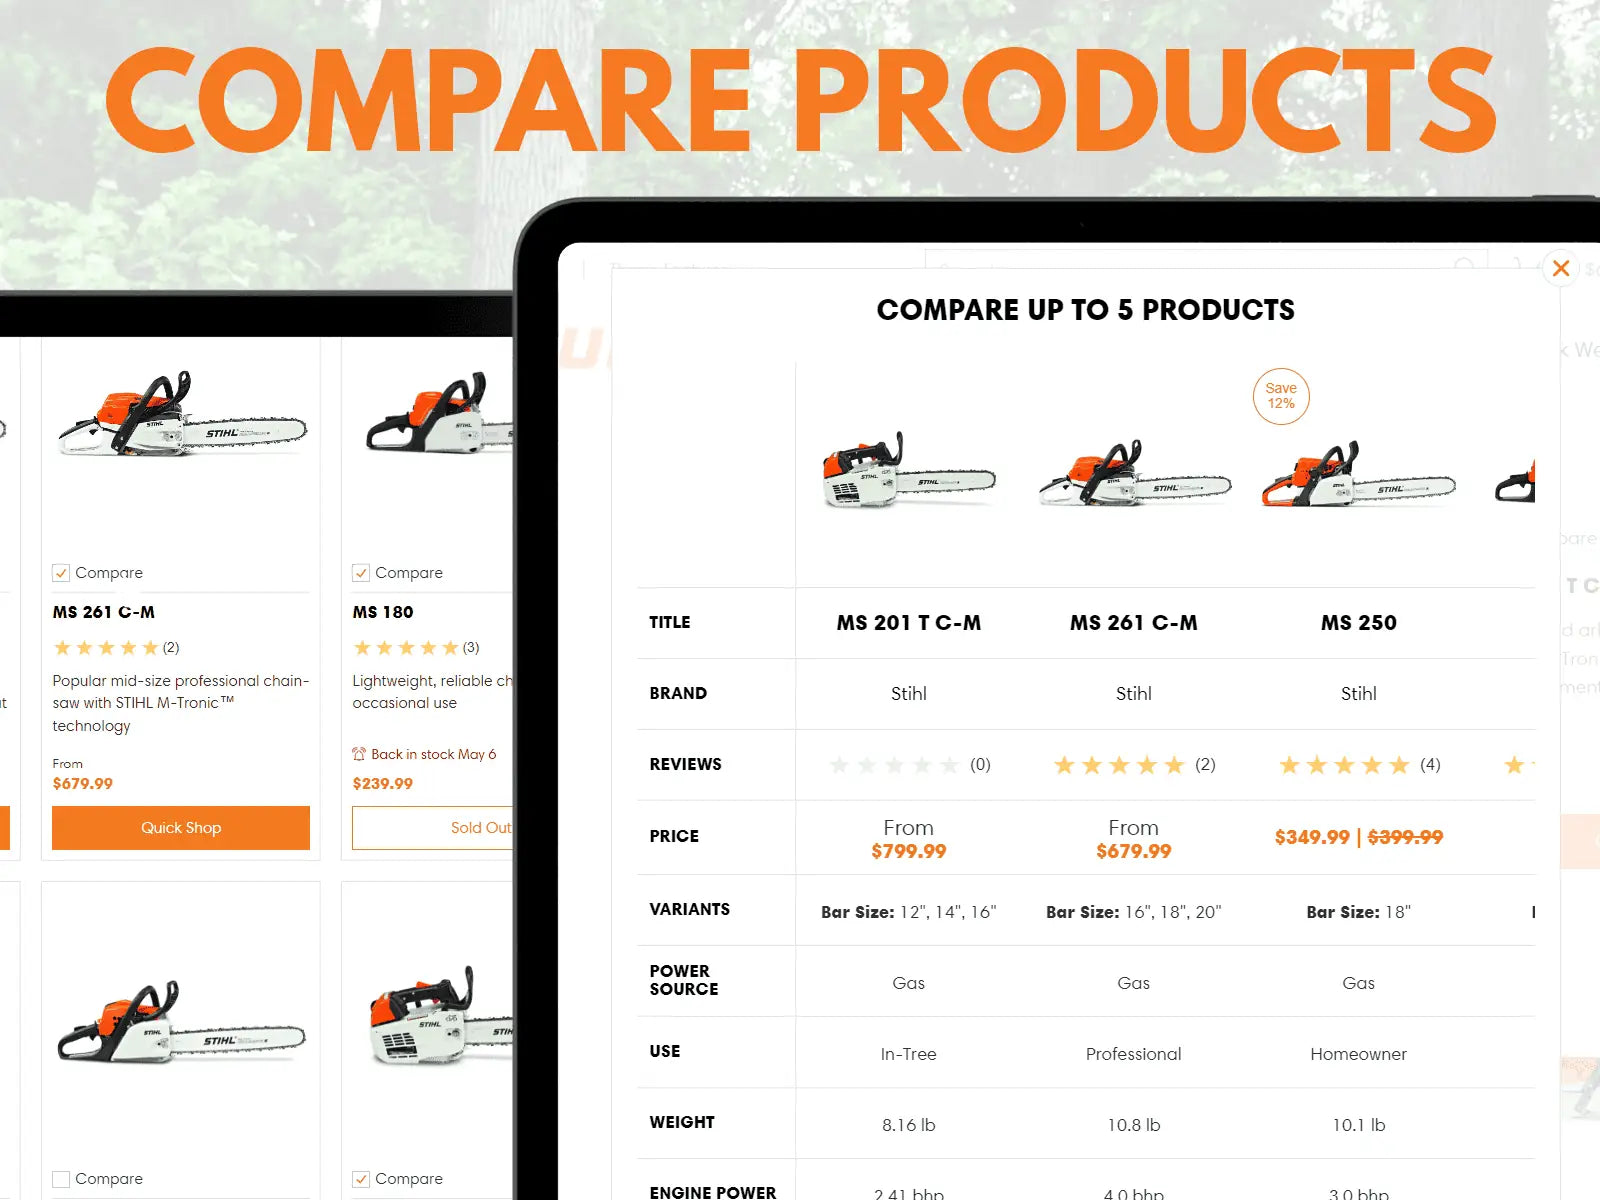 <div class="metafield-rich_text_field"><p><strong>Compare Products</strong></p><p>Compare up to 5 products using the vendor, rating, price, variants, and up to 20 custom metafields</p></div>